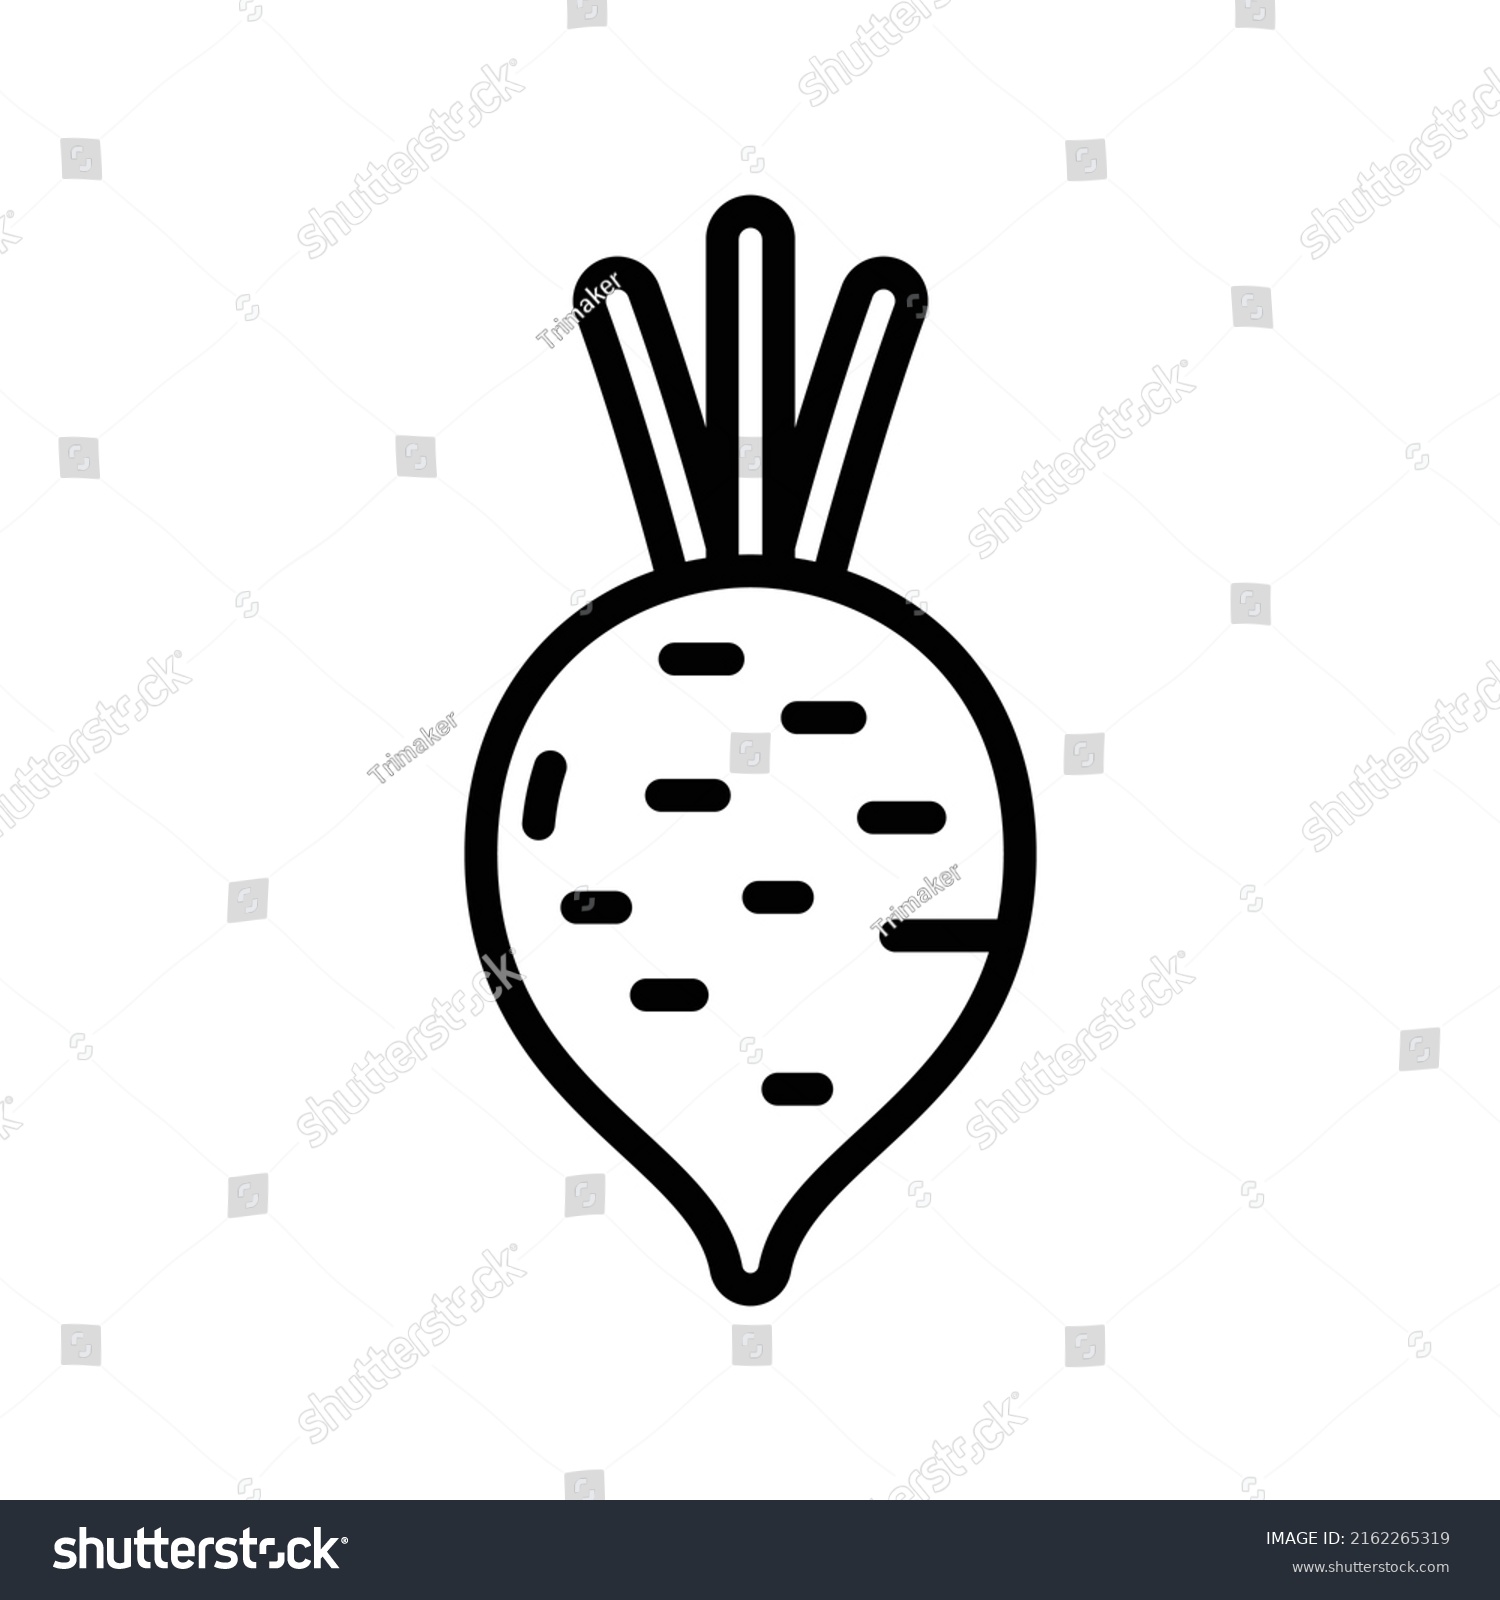 Beet Icon. Line Art Style Design Isolated On White Background #2162265319